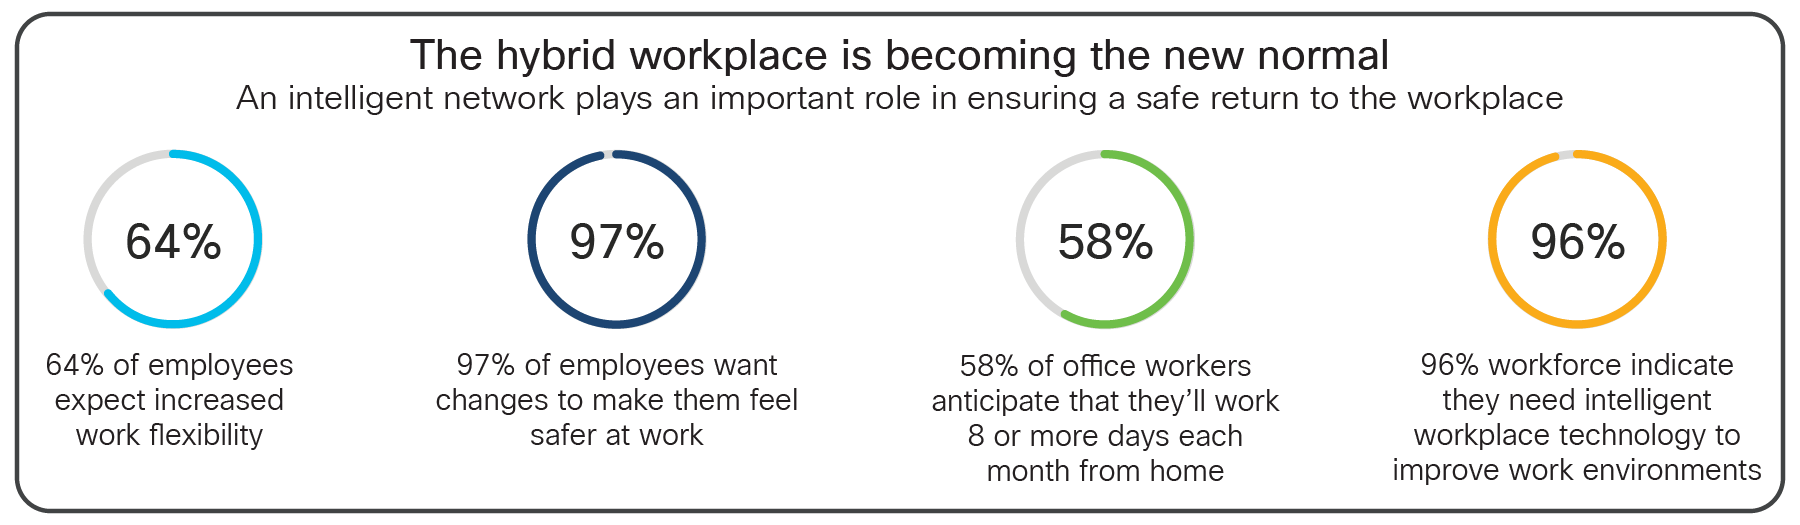 The hybrid workplace is becoming the new normal